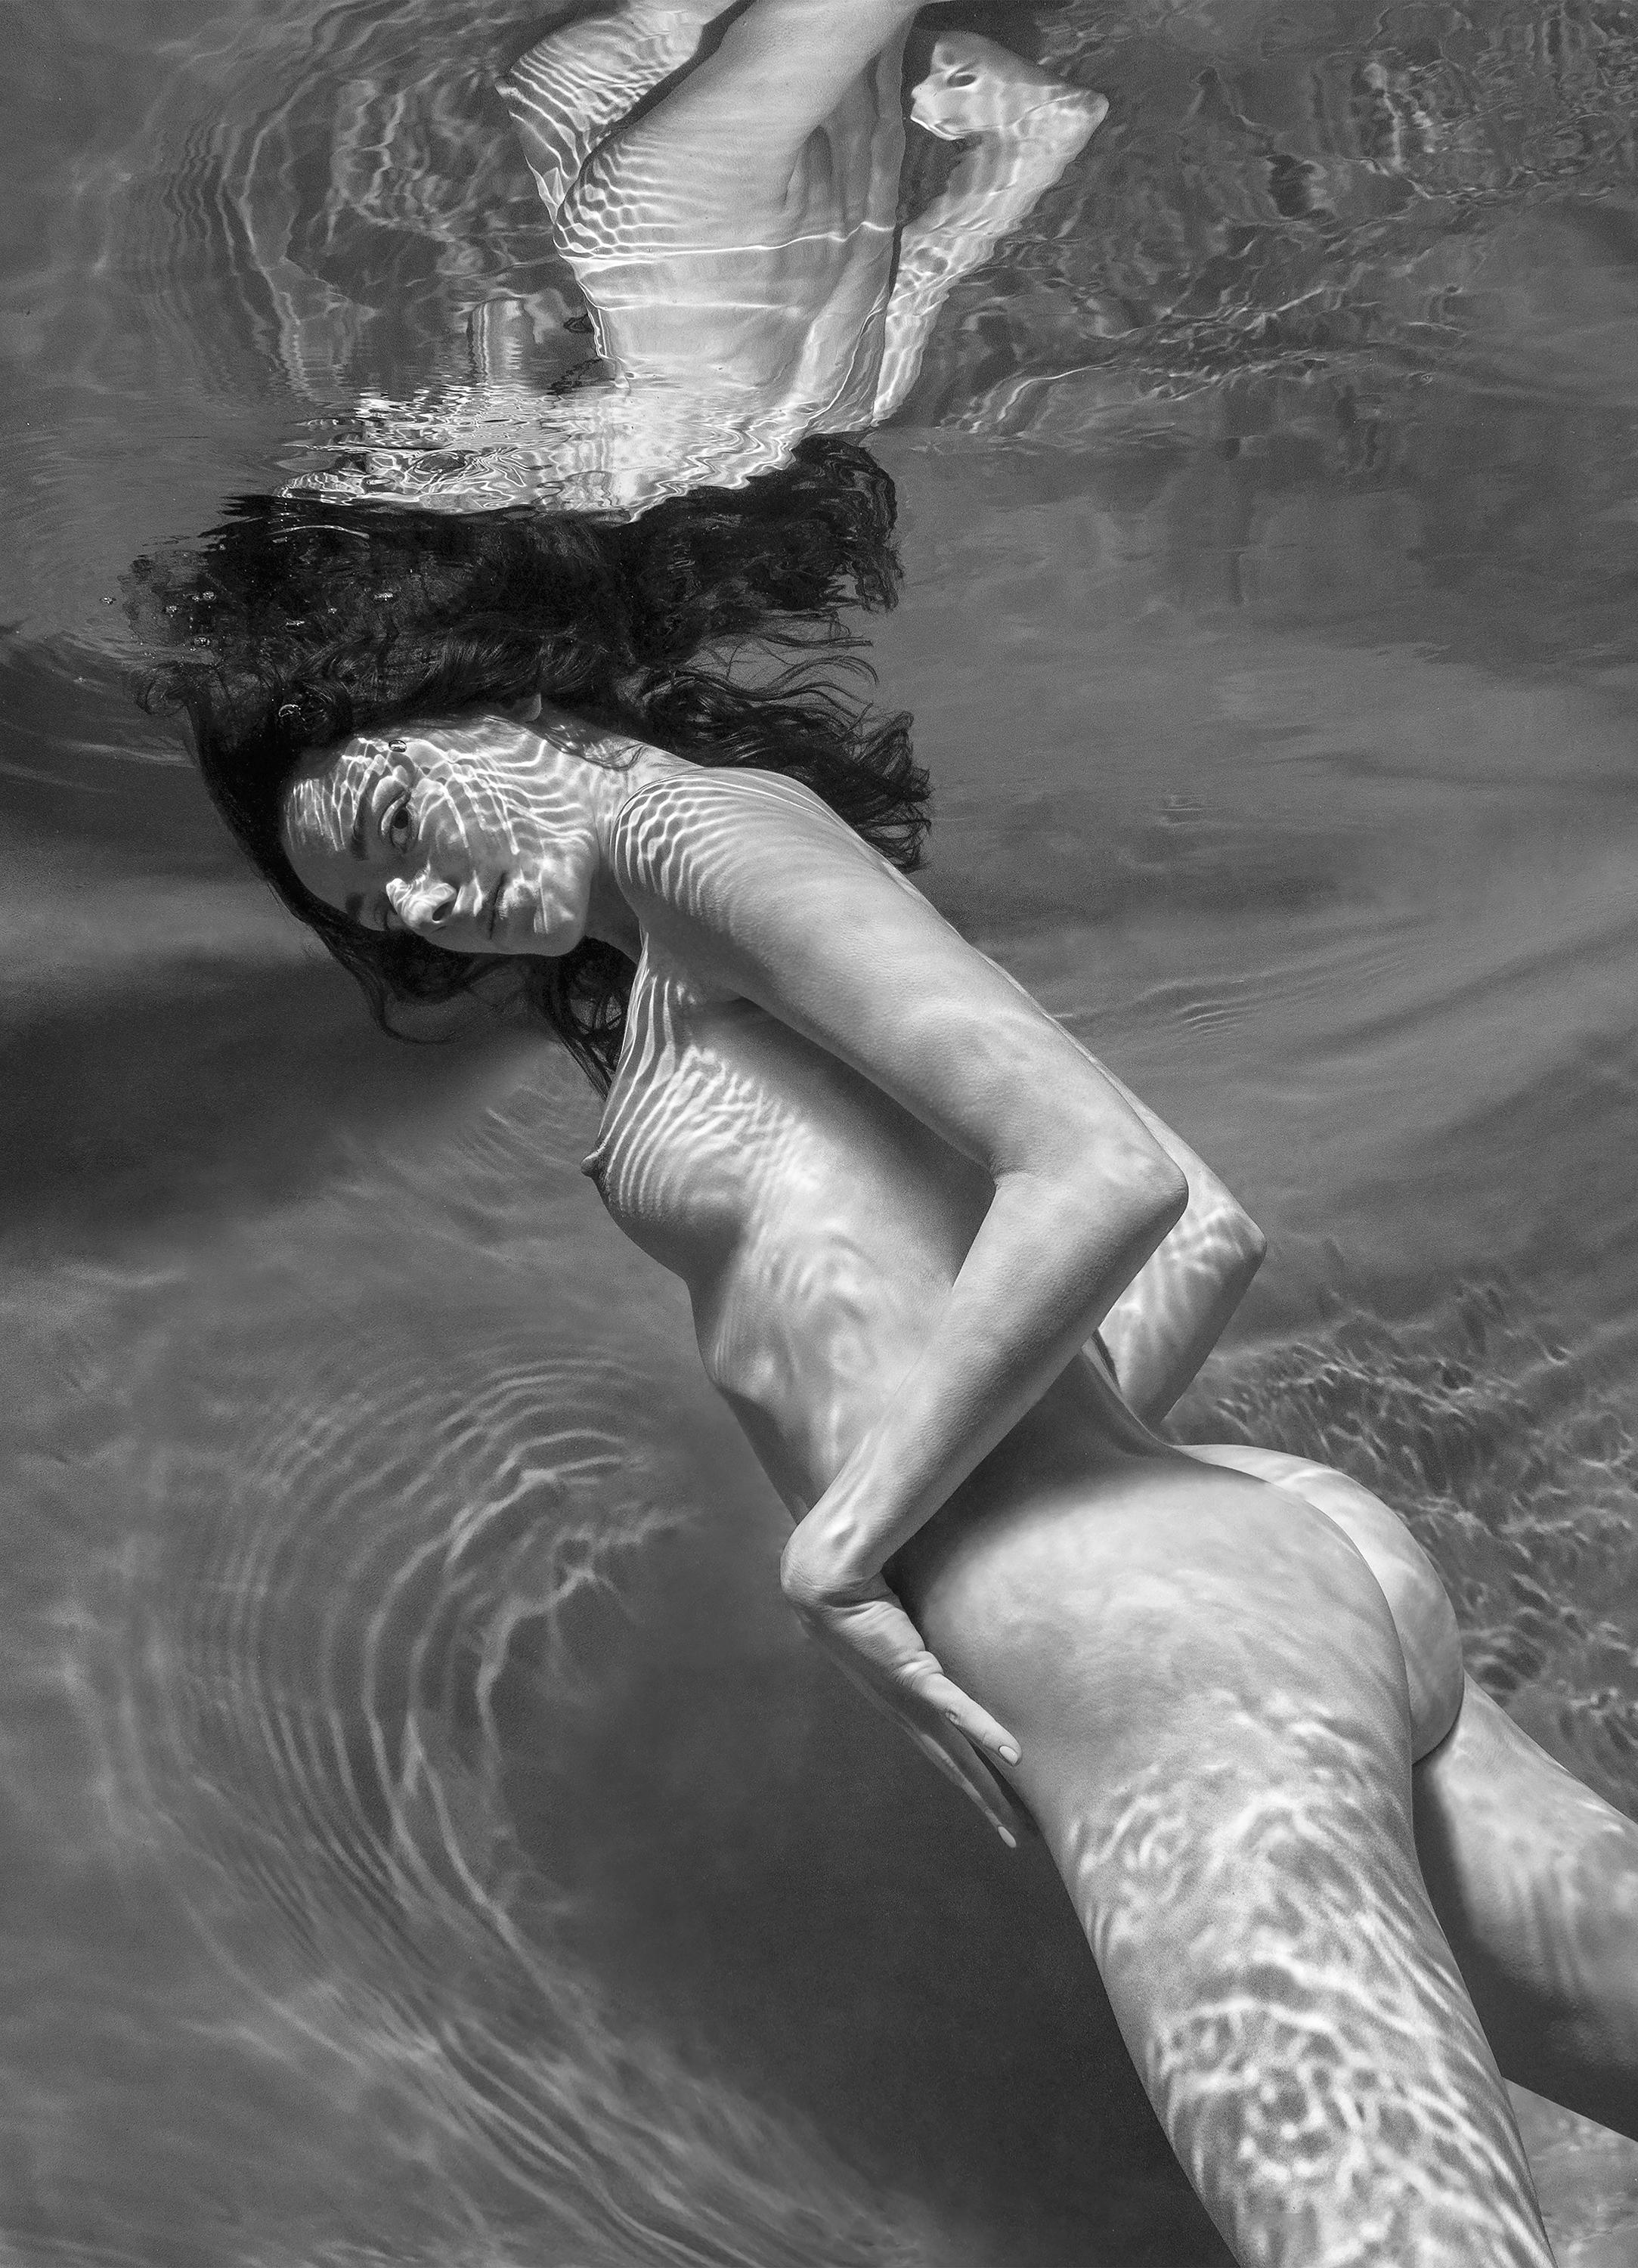 Alex Sher Black and White Photograph - Eyes and Stripes - underwater b&w nude photograph - print on aluminum 36х26"